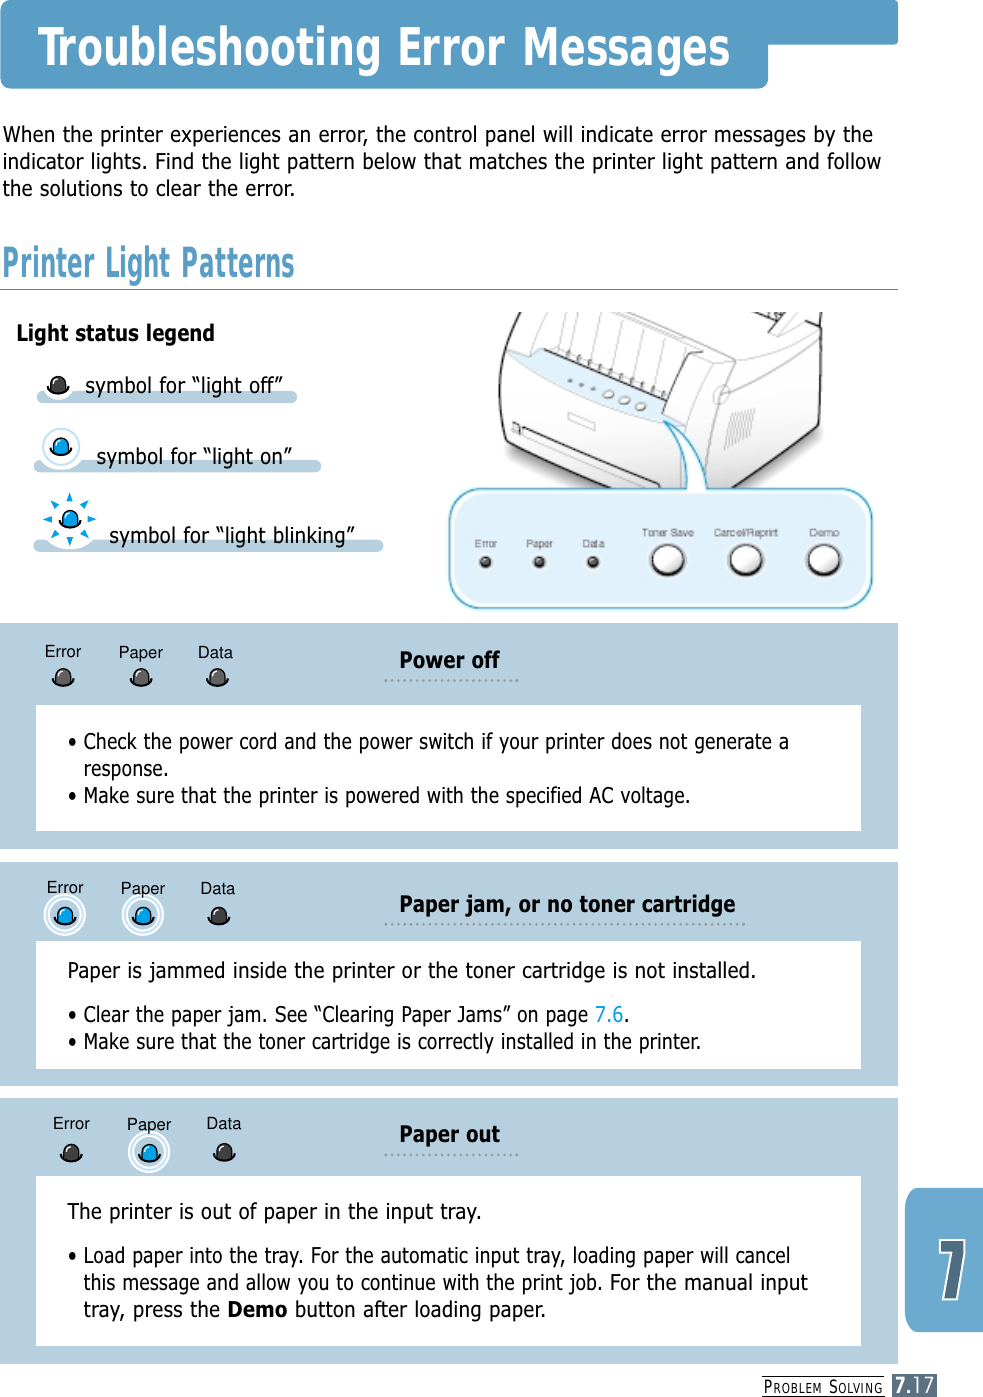 PROBLEM SOLVING7.17When the printer experiences an error, the control panel will indicate error messages by theindicator lights. Find the light pattern below that matches the printer light pattern and followthe solutions to clear the error.Troubleshooting Error MessagesPrinter Light PatternsLight status legendsymbol for “light on”symbol for “light blinking”symbol for “light off”• Check the power cord and the power switch if your printer does not generate aresponse.• Make sure that the printer is powered with the specified AC voltage.Power offError Paper DataThe printer is out of paper in the input tray. • Load paper into the tray. For the automatic input tray, loading paper will cancelthis message and allow you to continue with the print job. For the manual inputtray, press the Demo button after loading paper.Paper out DataError PaperPaper is jammed inside the printer or the toner cartridge is not installed. • Clear the paper jam. See “Clearing Paper Jams” on page 7.6.• Make sure that the toner cartridge is correctly installed in the printer.Paper jam, or no toner cartridgeDataError Paper